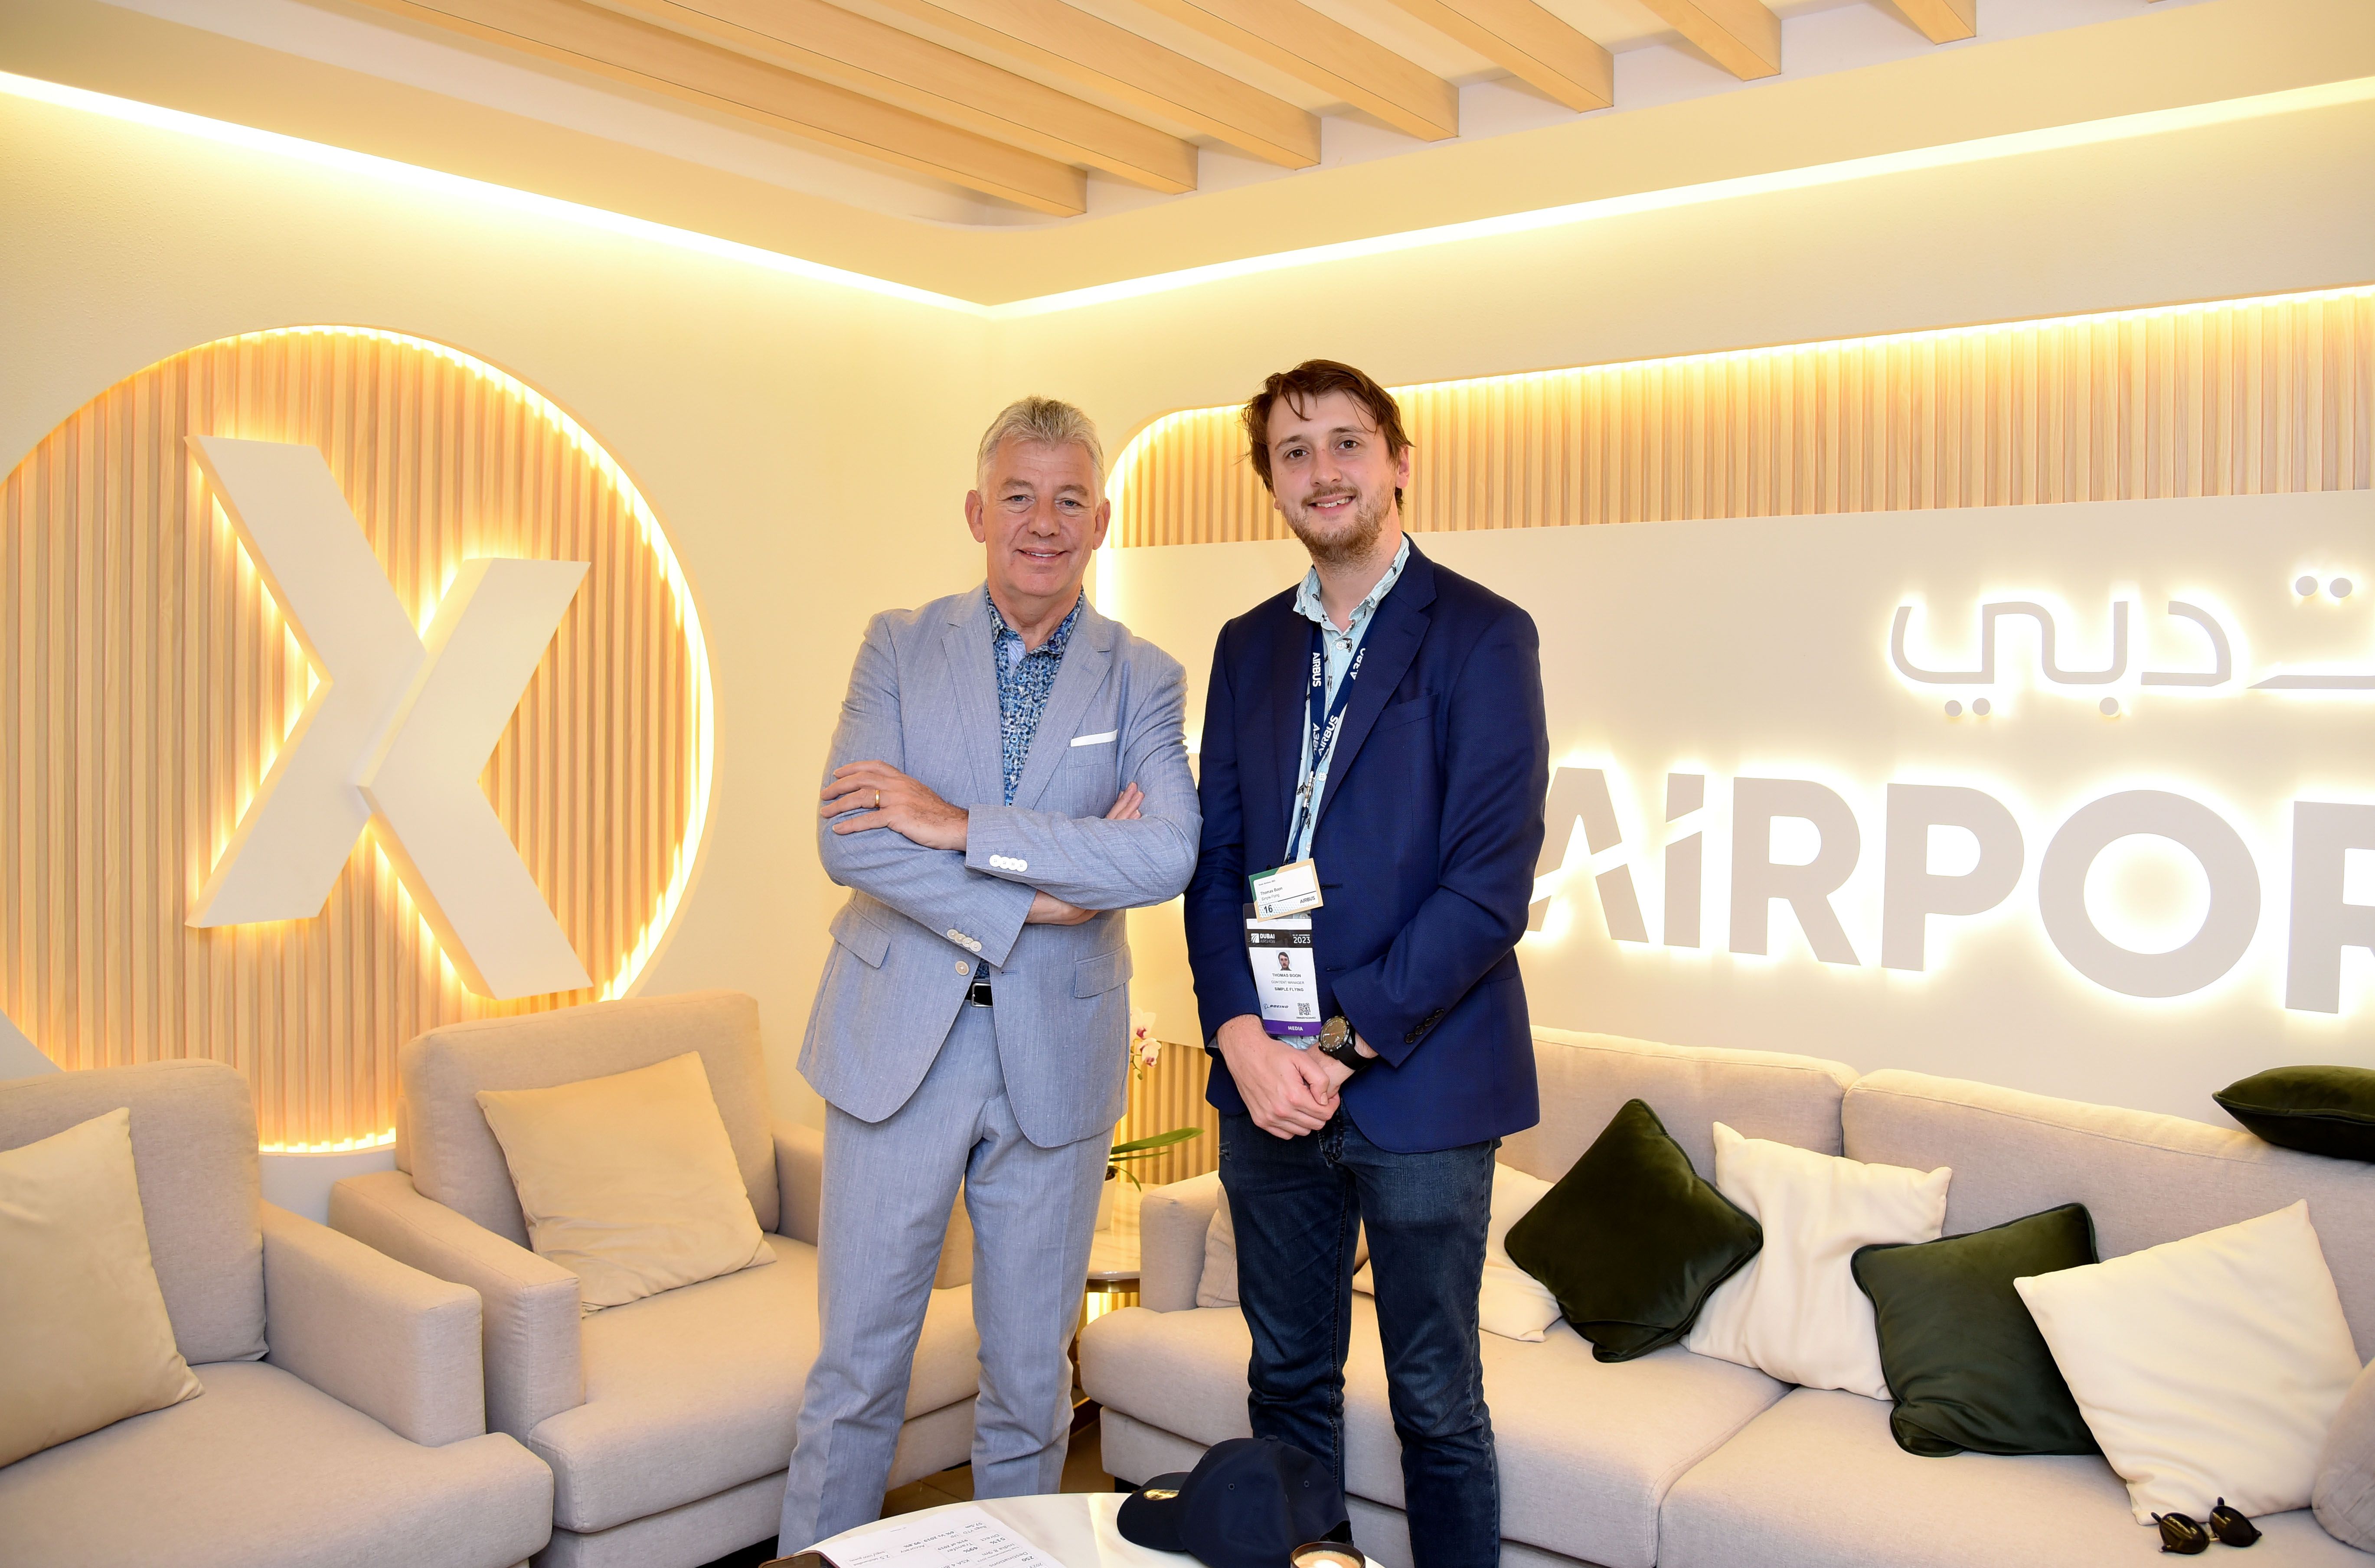 Simple Flying Content Manager Tom Boon poses with Dubai Airports CEO Paul Griffiths